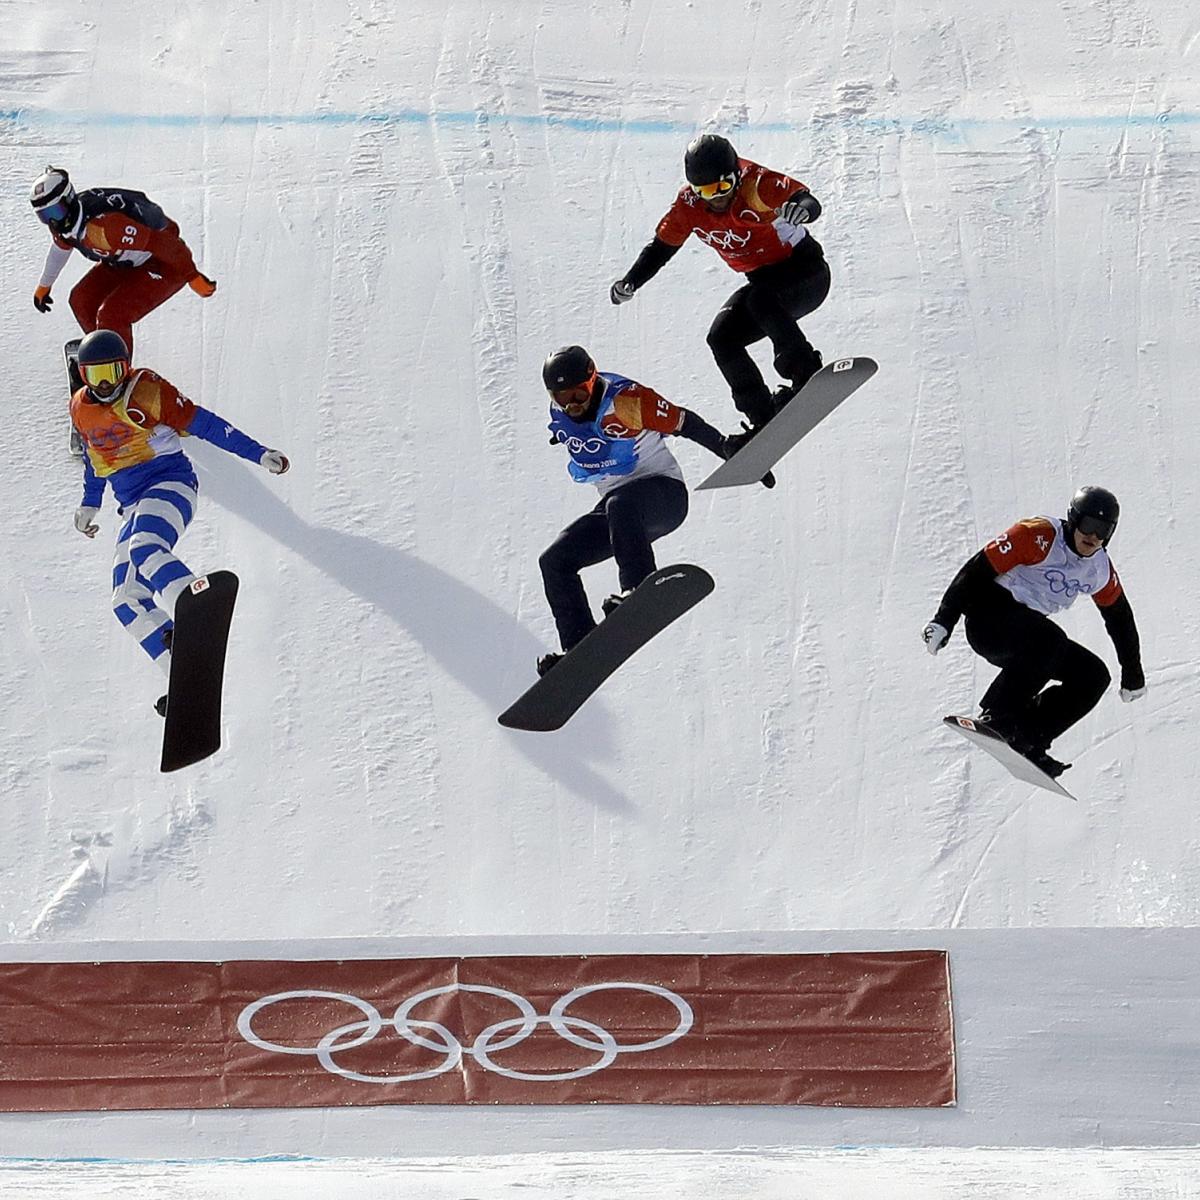 Olympic Snowboarding Men's Cross 2022 TV Schedule, Live Stream and